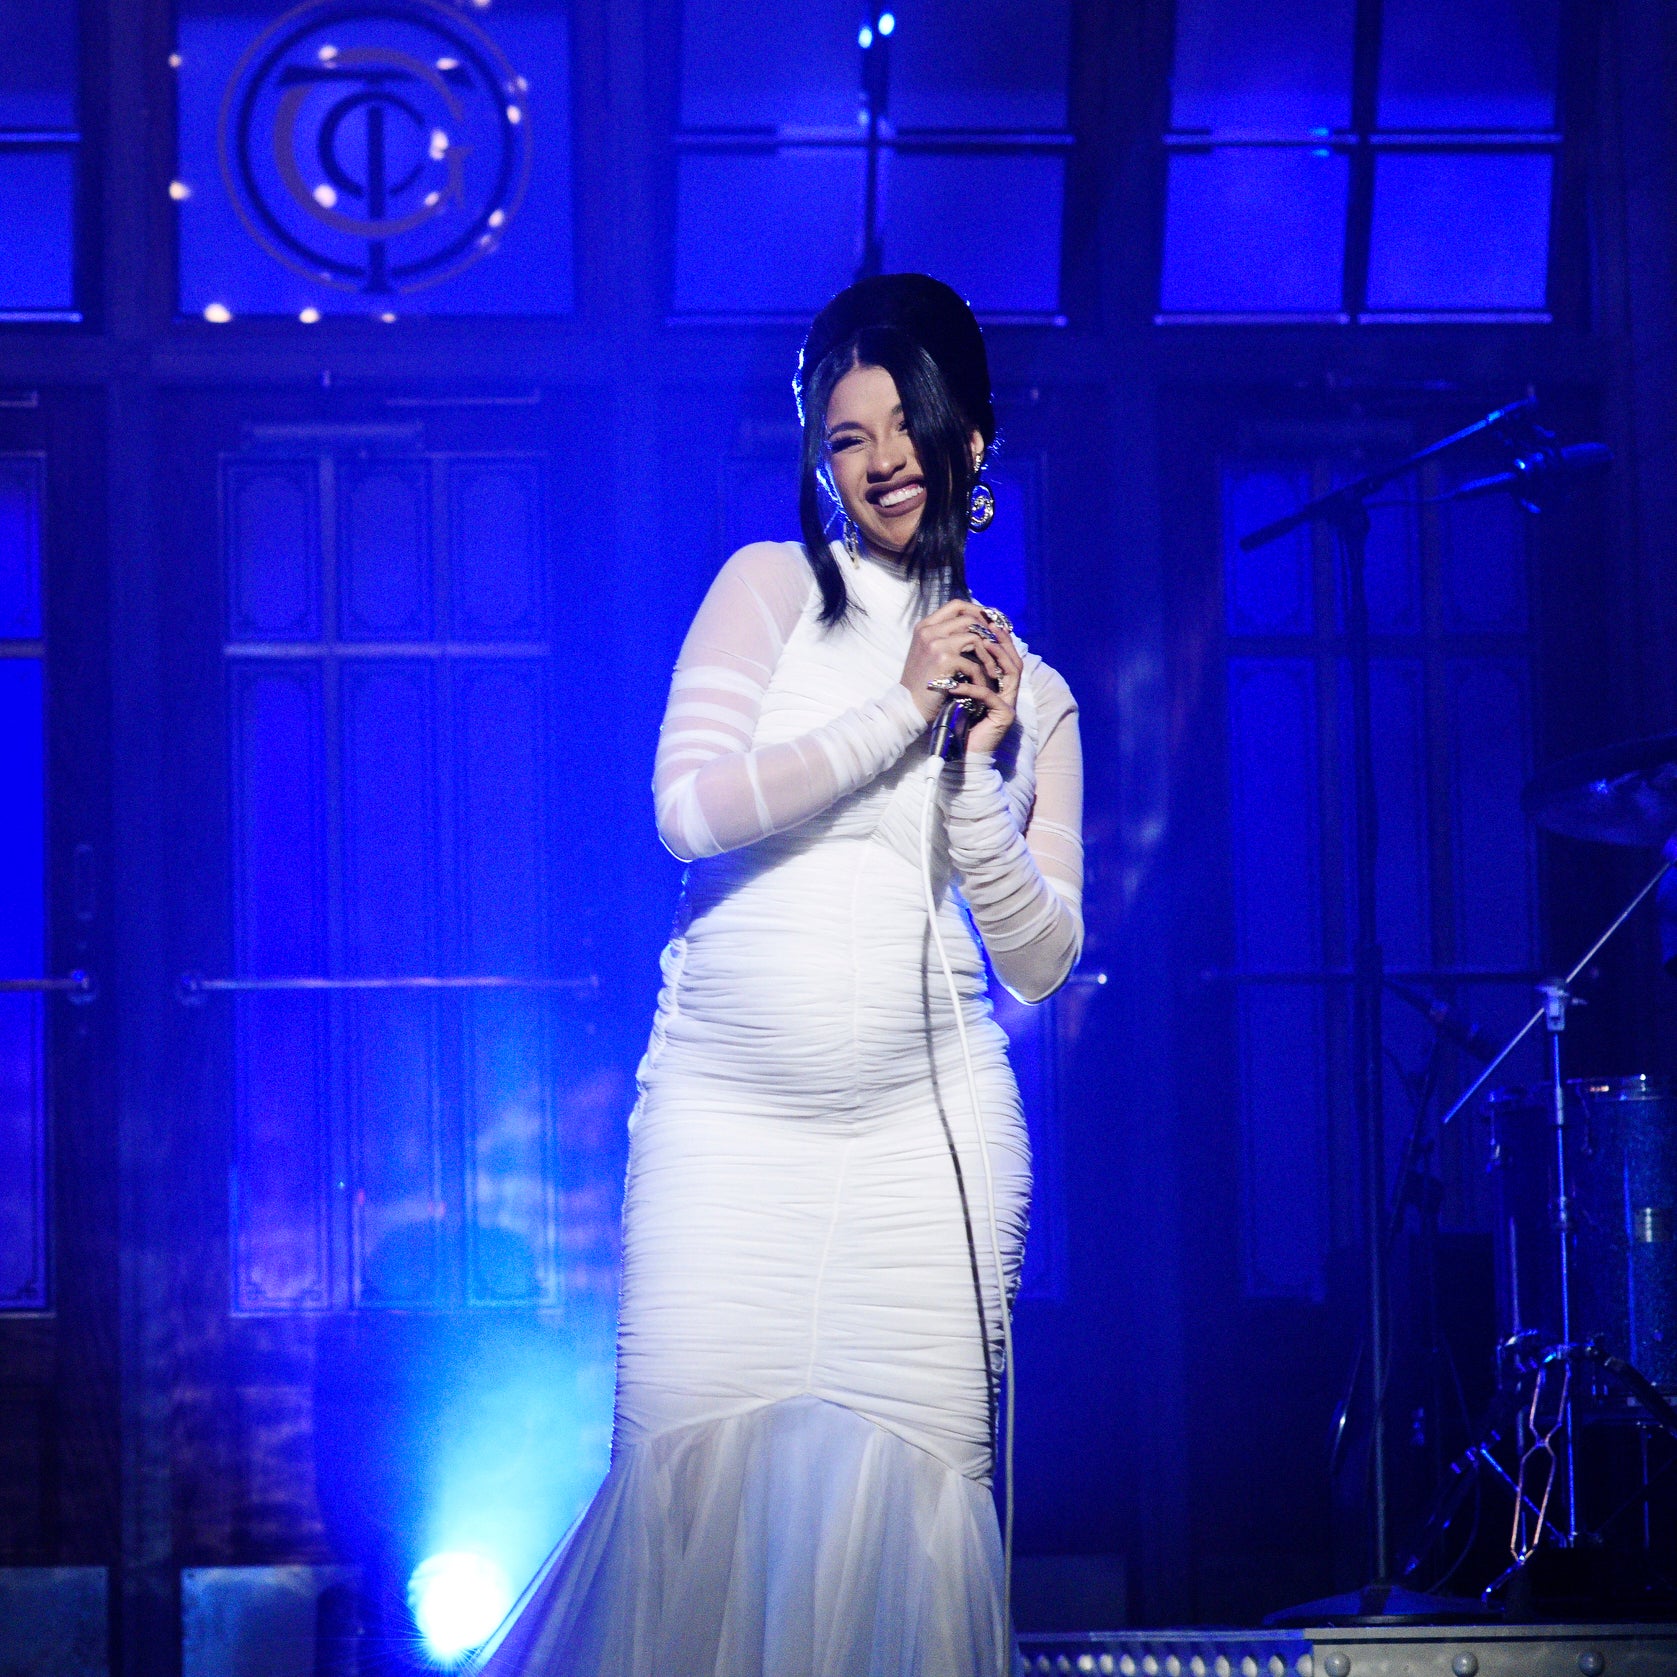 Cardi B Confirms Pregnancy On SNL As New Album Is Set For #1 Debut
